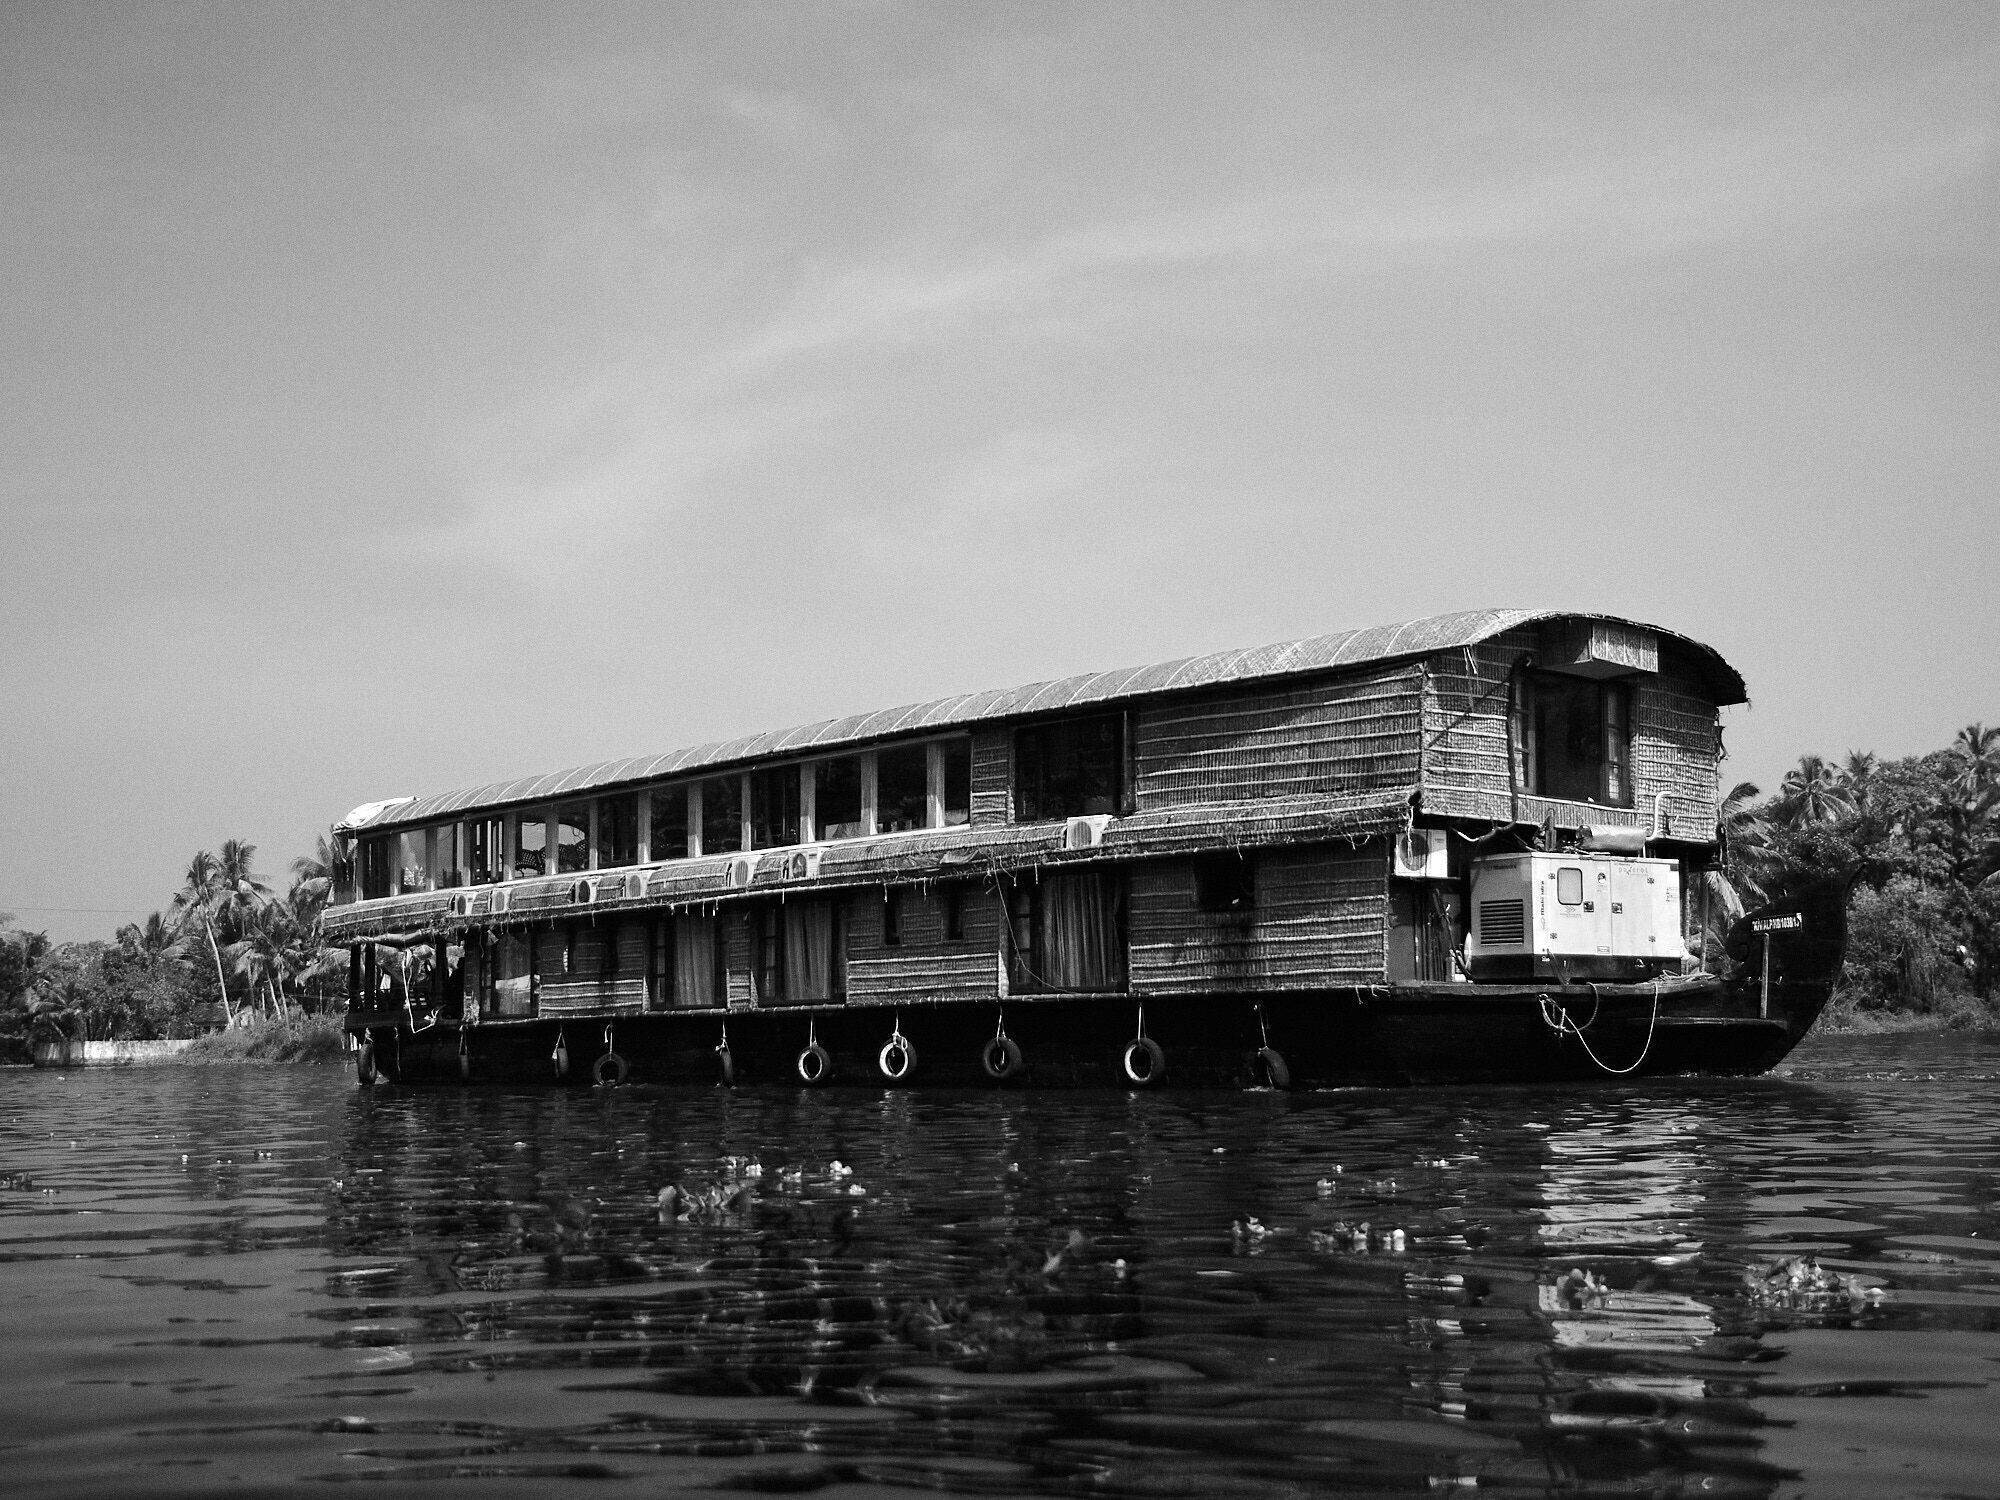  A large houseboat with larger number of rooms and facilities for conferences navigating through the backwaters in Alappuzha, Kerala. 